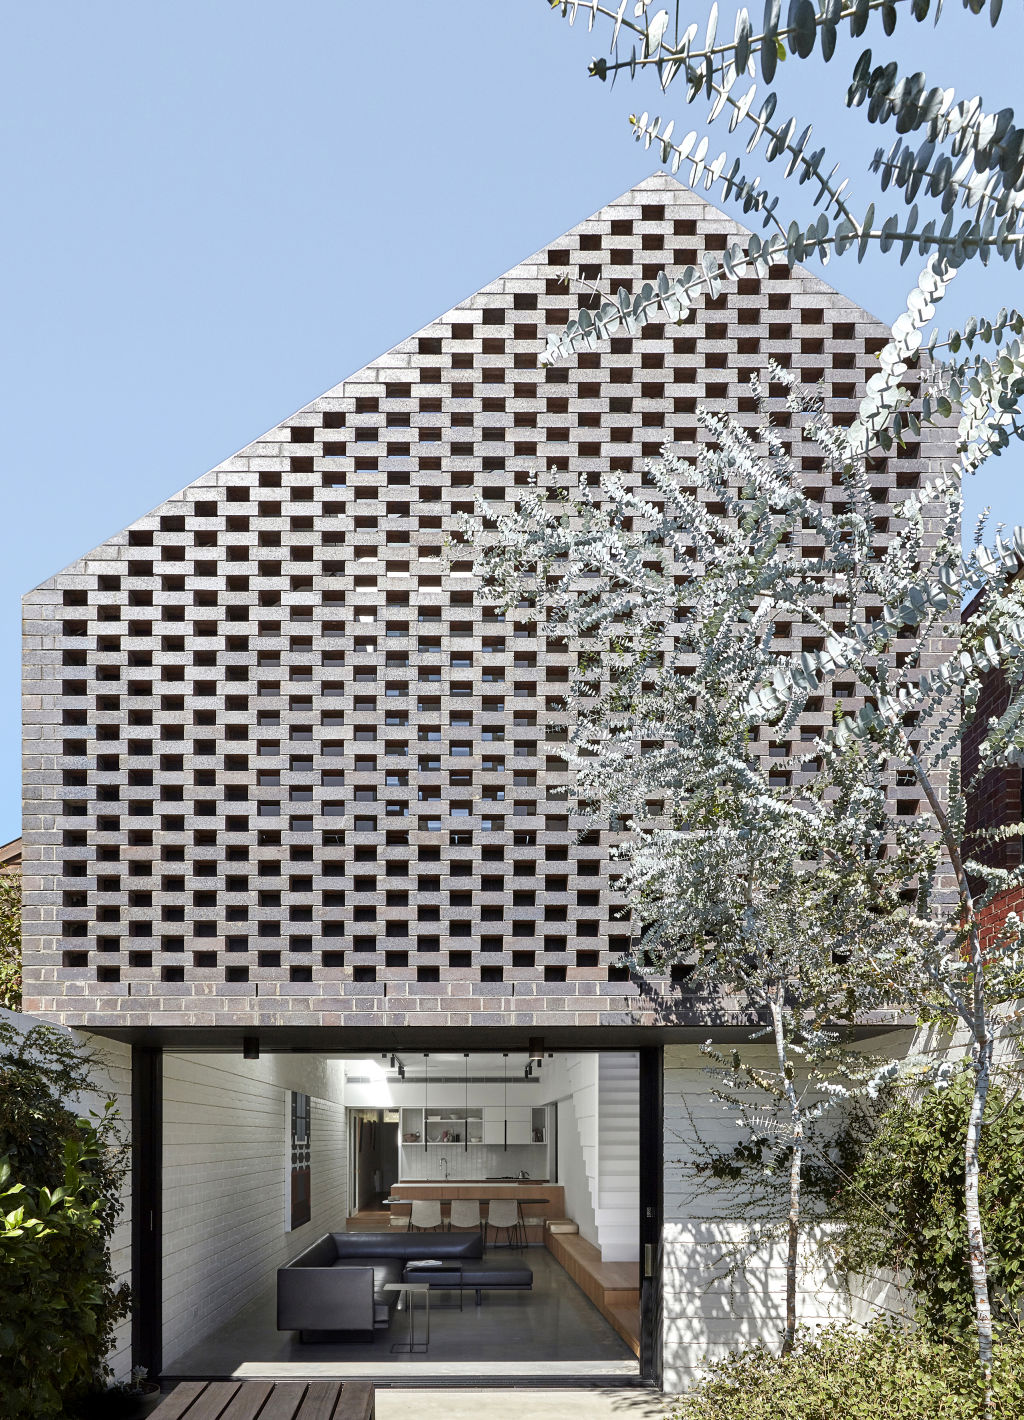 Garden Wall House by Studio Bright (formally known as MAKE Architecture). Photo: Sean Fennessy